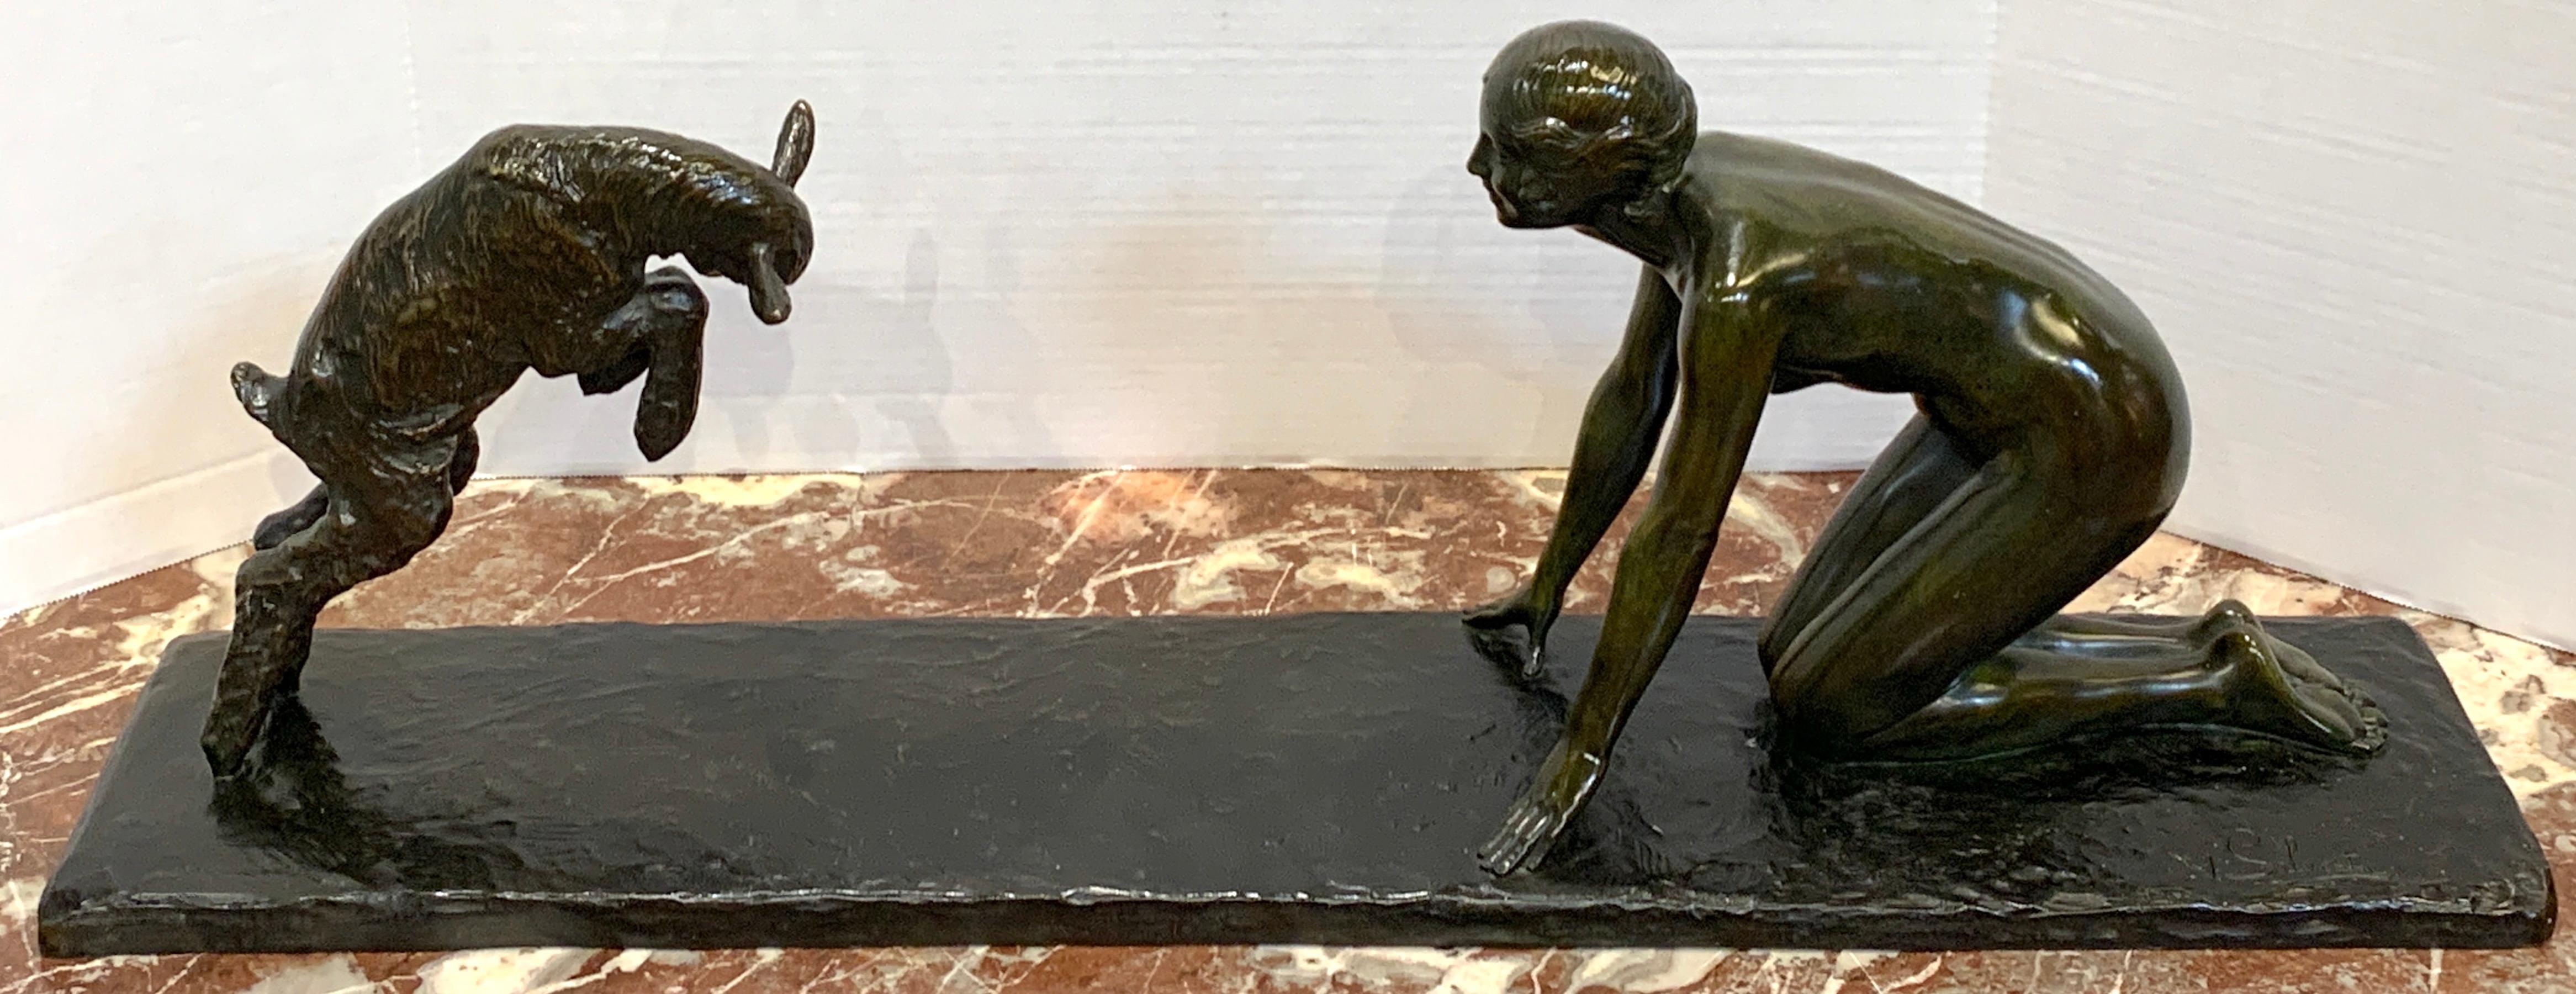 'Girl and Jumping Goat' by Paul Silvestre, Susse Freres Foundry, France, C 1925 For Sale 4